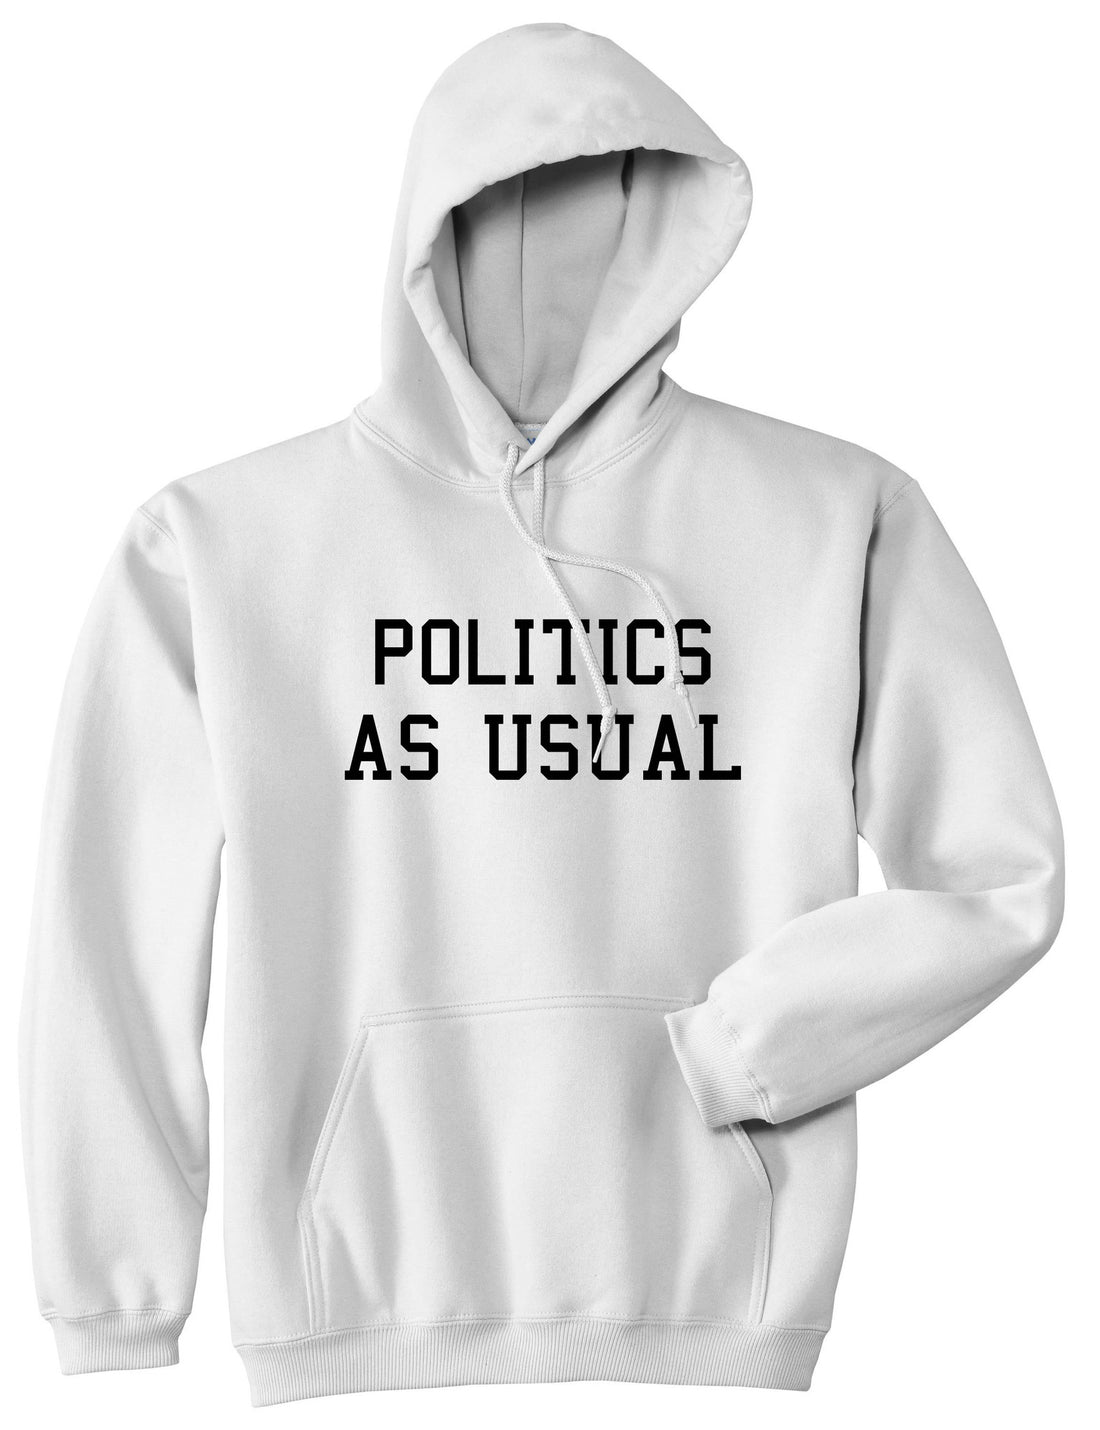 Politics As Usual Hiphop Lyrics Jay 23 Z Old School Boys Kids Pullover Hoodie Hoody in White by Kings Of NY